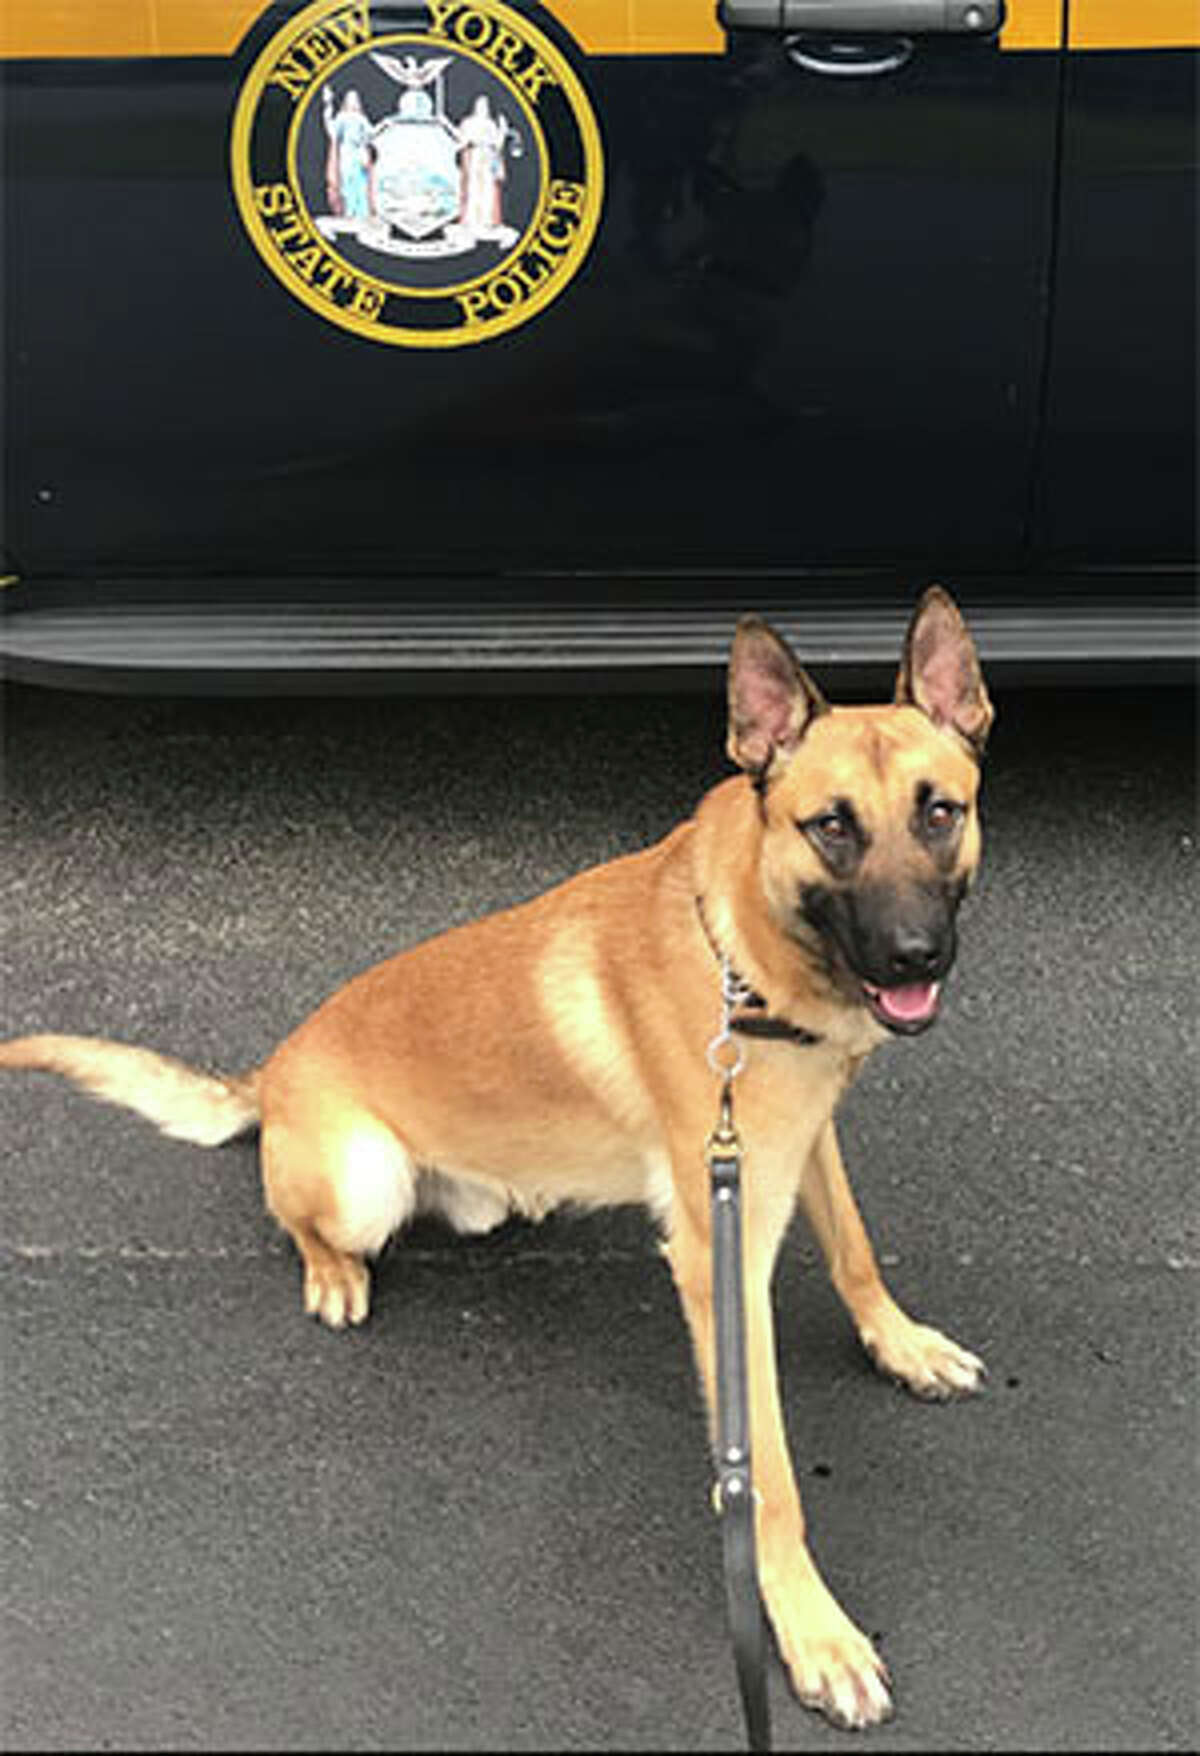 Chase is a male Belgian Malinois who specializes in detecting narcotics, tracking and protecting his handler. He is based in Troop G’s Northway station and handled by Trooper Jarrod Bowman. Chase is named after Covel Chase Pierce. The 60-year-old died of brain cancer on March 10, 2011. The cancer was linked to his search and rescue work at ground zero after the Sept. 11, 2001, terrorist attacks. Pierce, a husband and father of two, served the State Police in Troop G and K for 30 years, and retired while assigned to the Saratoga barracks.